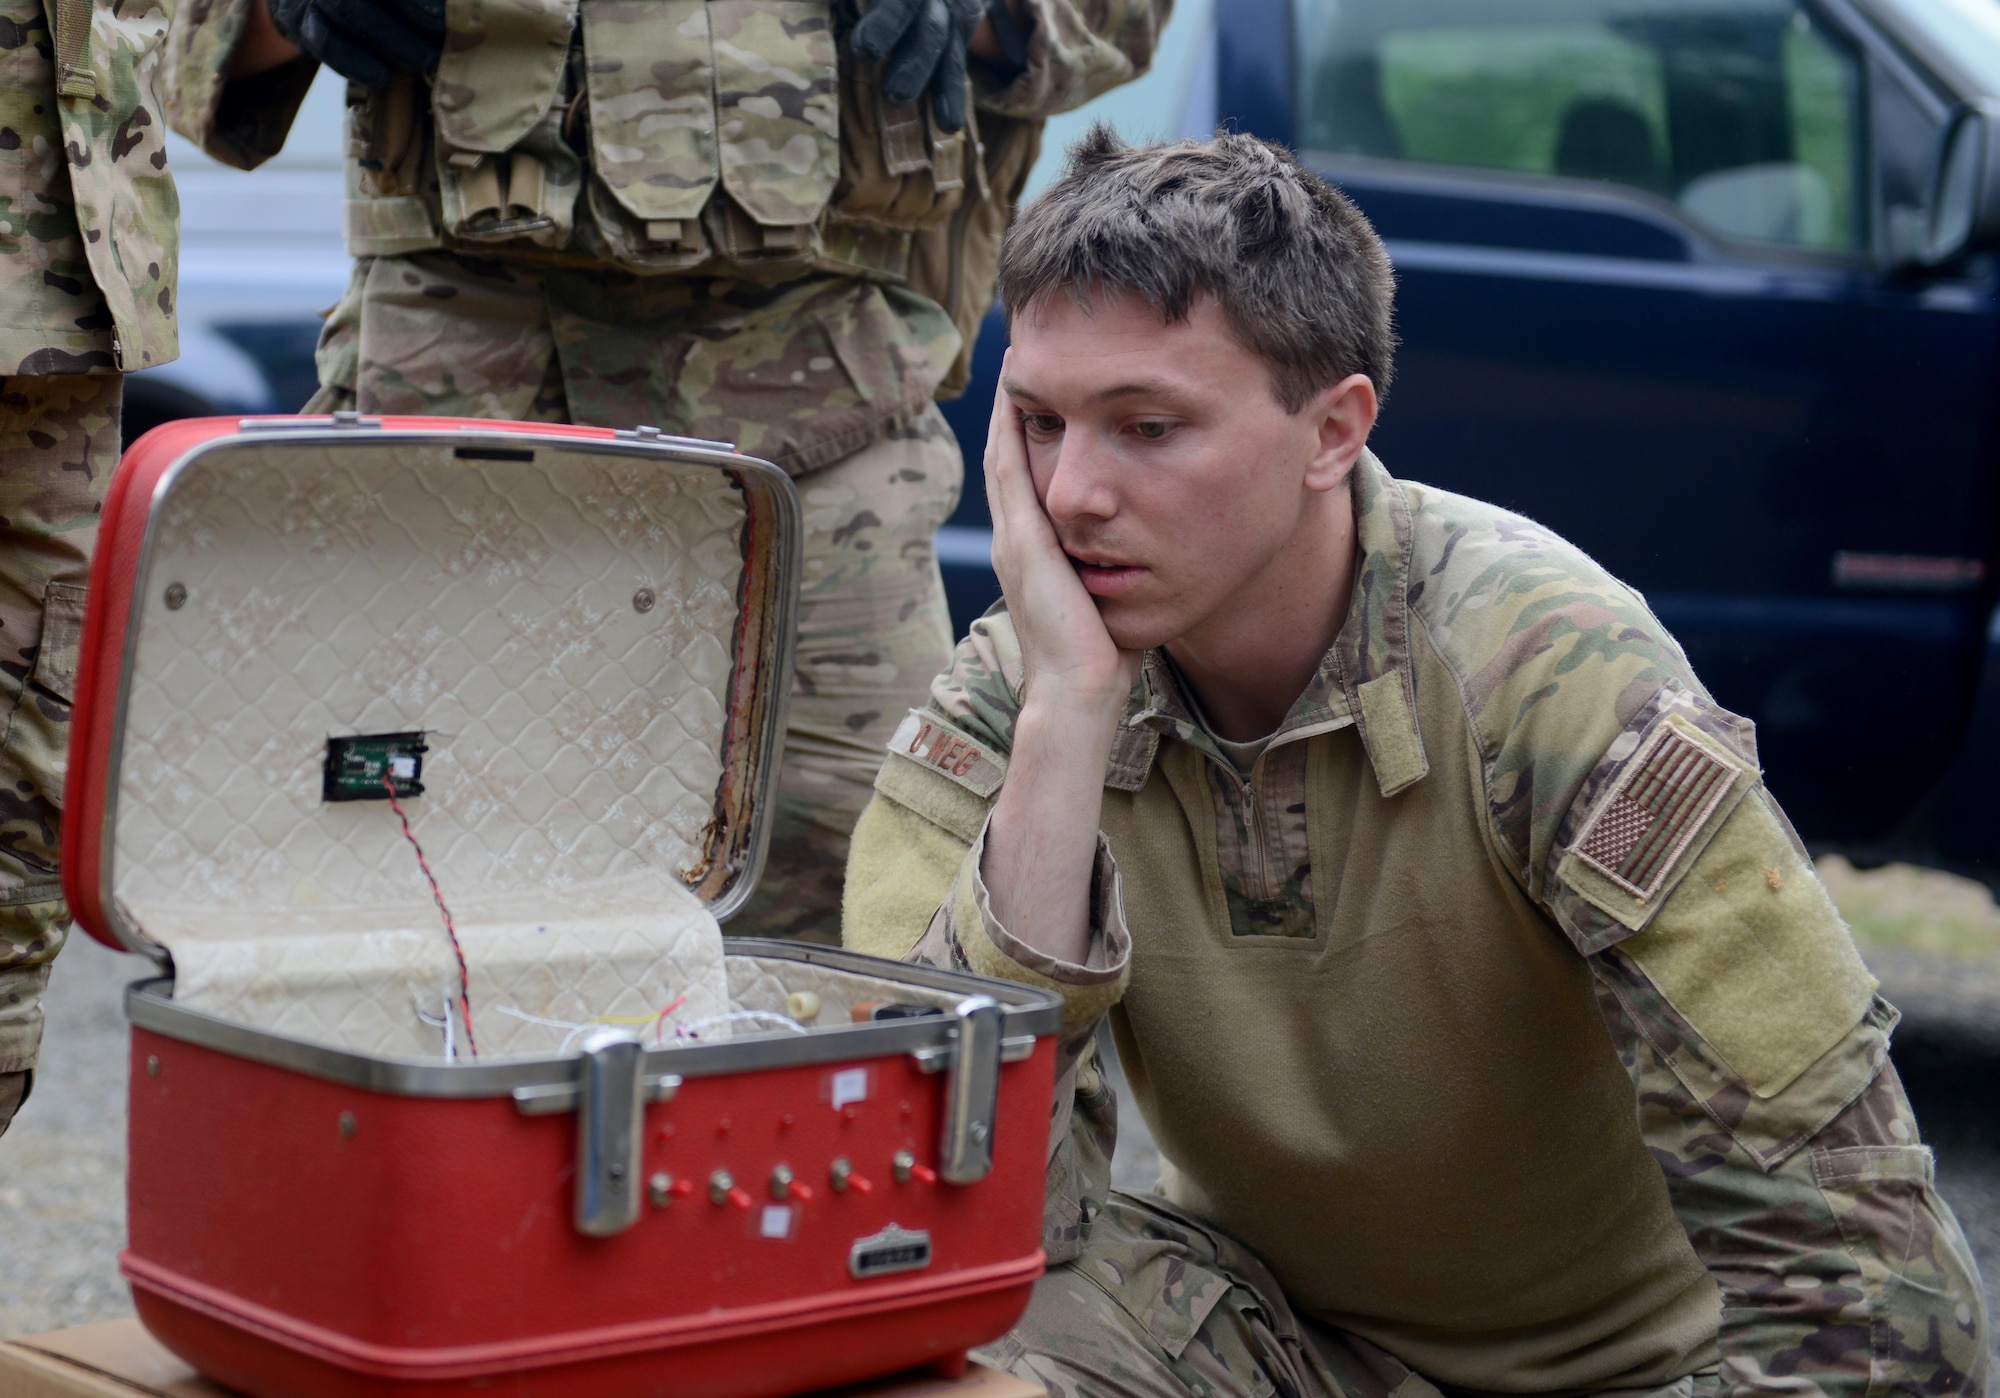 Staff Sgt. David Dezwaan, 60th Civil Engineer Squadron explosive ordnance disposal technician, inspects the wiring of a simulated radioactive dispersal device during an exercise May 5th, 2016, at Clear Lake, California. Dezwaan and other EOD technicians were able to eliminate the threat of numerous improvised explosive devices and the radioactive dispersal device during Operation: Half-Life, an exercise designed to evaluate a synchronized, multi-agency response to a crisis situation. (U.S. Air Force photo by Senior Airman Bobby Cummings)